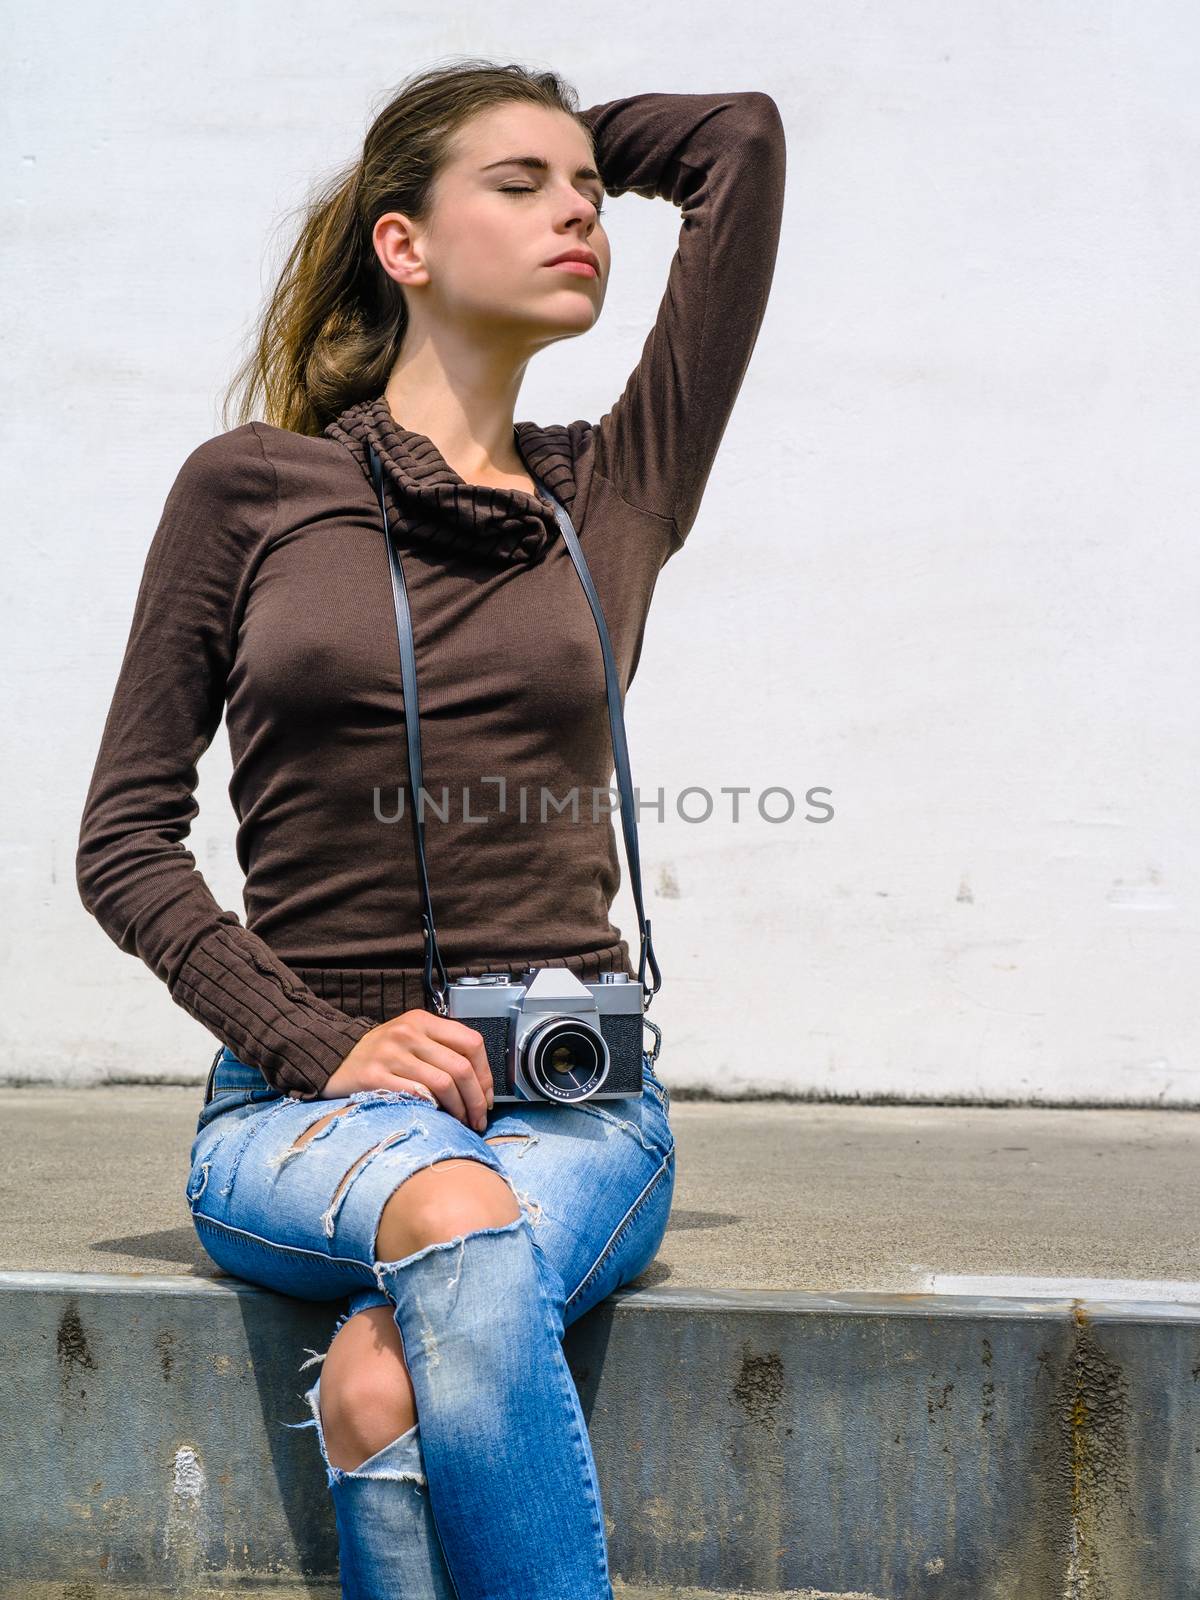 Sexy woman photographer by sumners